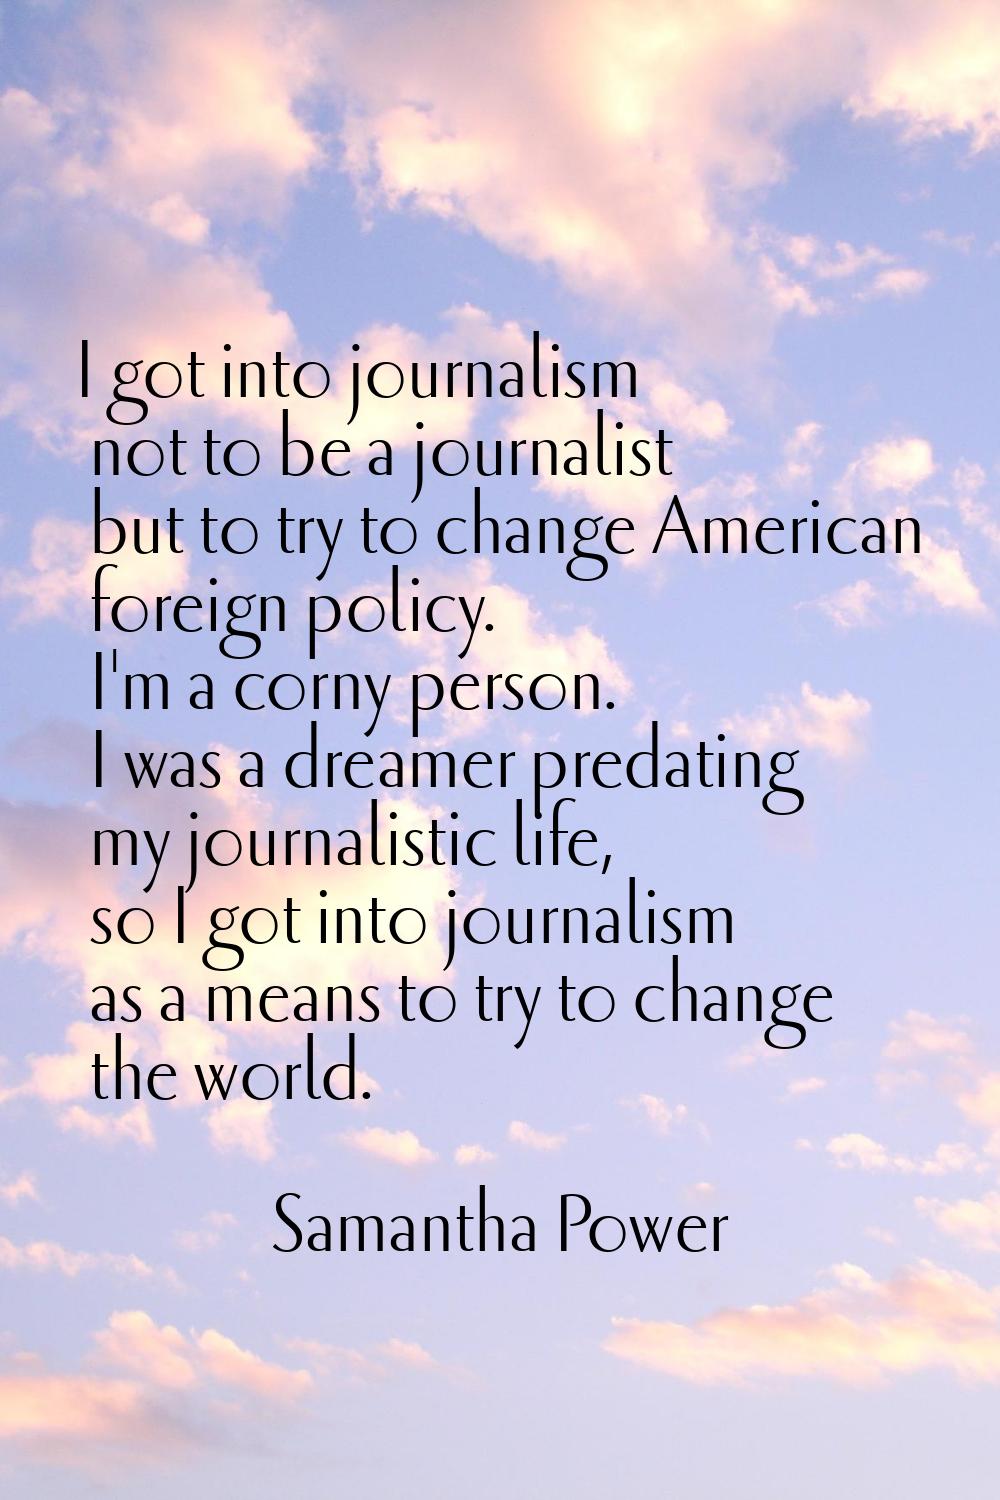 I got into journalism not to be a journalist but to try to change American foreign policy. I'm a co